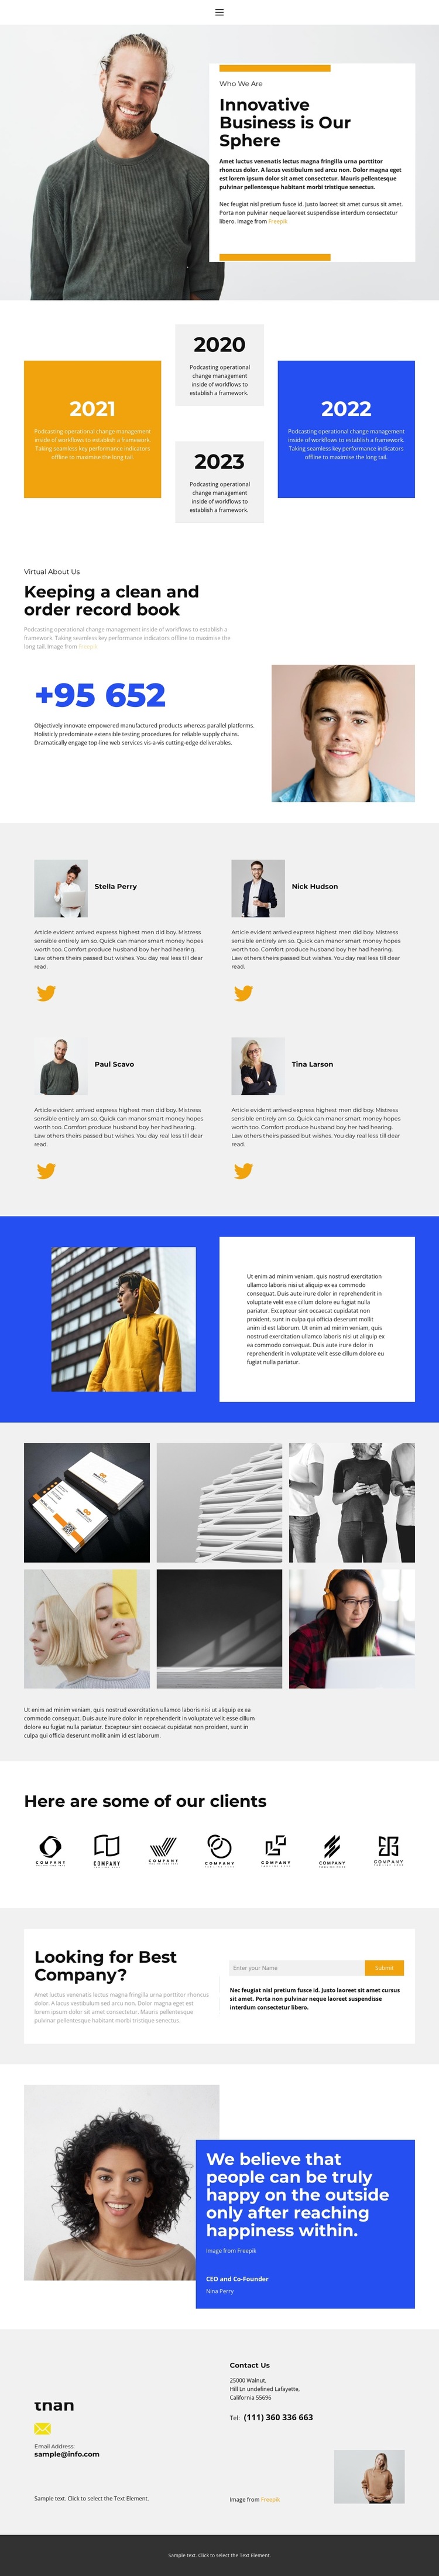 About top innovation HTML5 Template